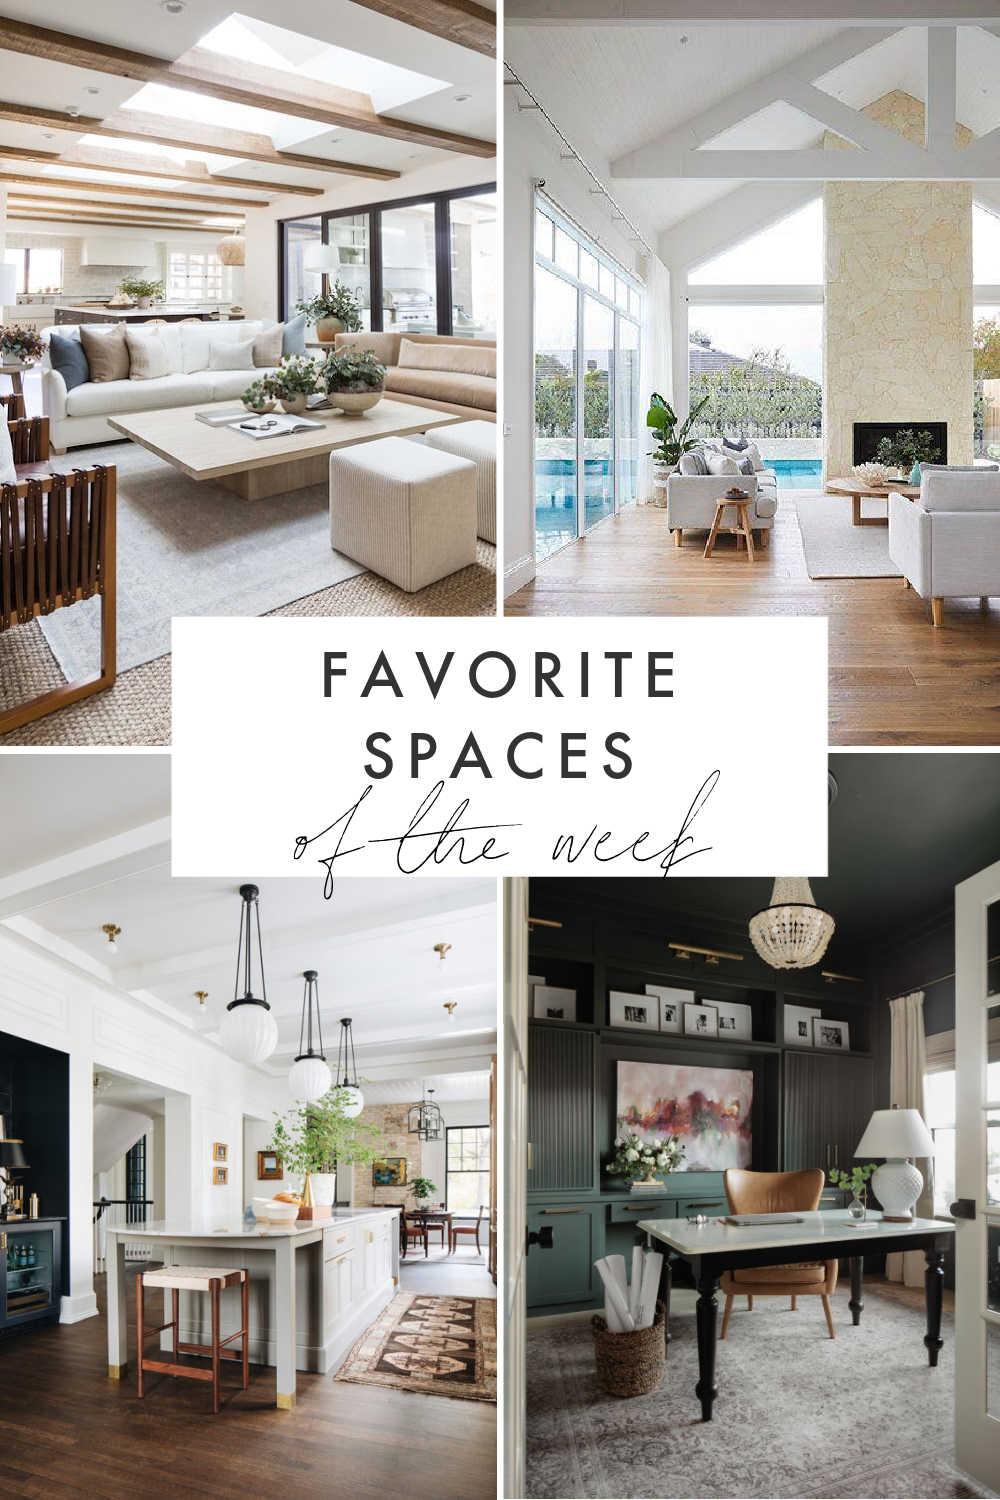 See this week's favorite spaces and top pins for the home, including beautiful ideas for decorating the kitchen patio, bathroom and more + great weekend sales!